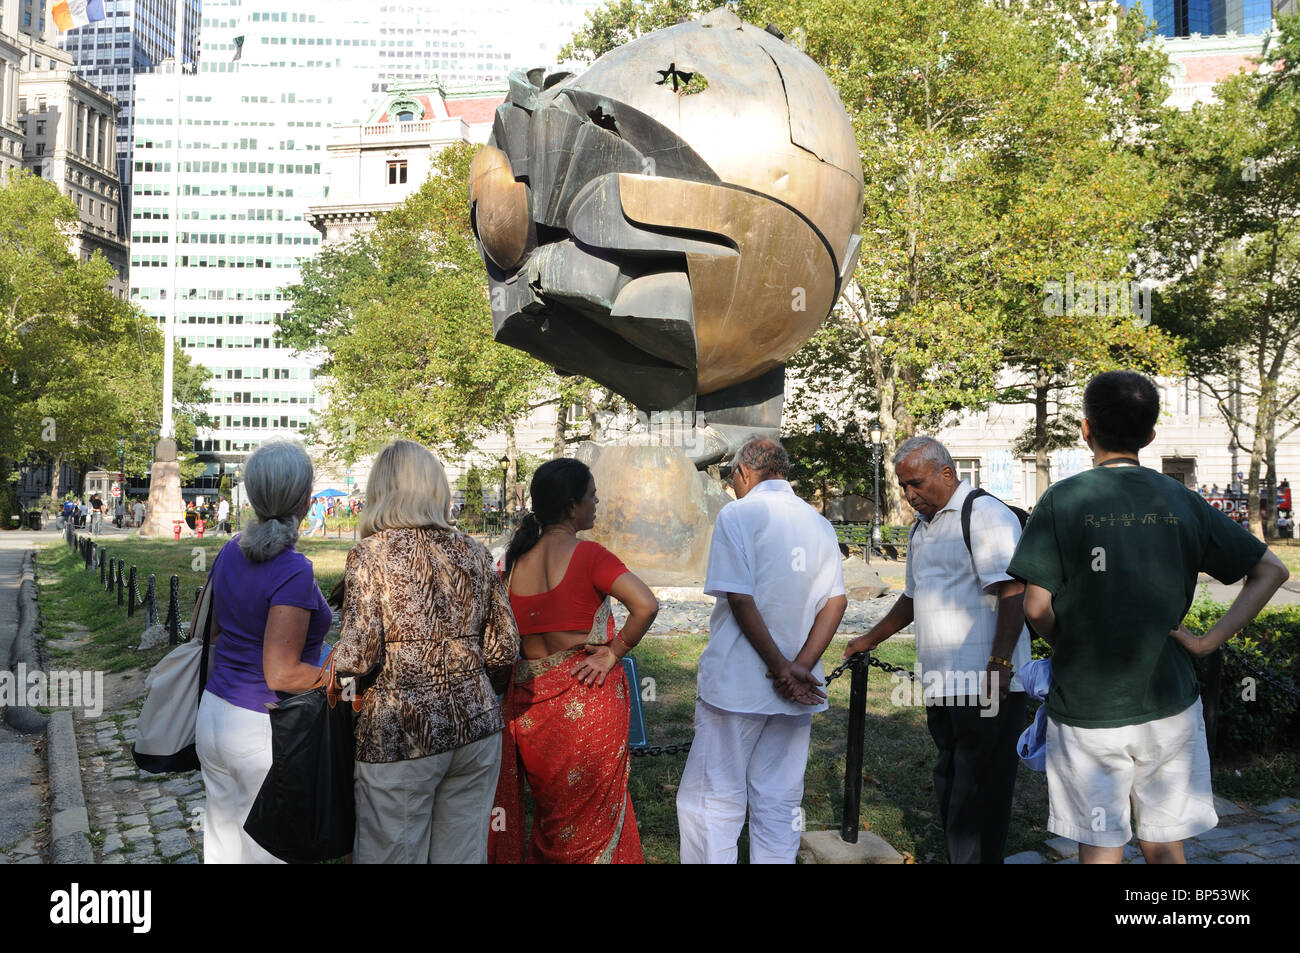 'The Sphere' once stood on the plaza at the World Trade Center. Damaged on Sept. 11, 2001, it was moved to nearby Battery Park. Stock Photo